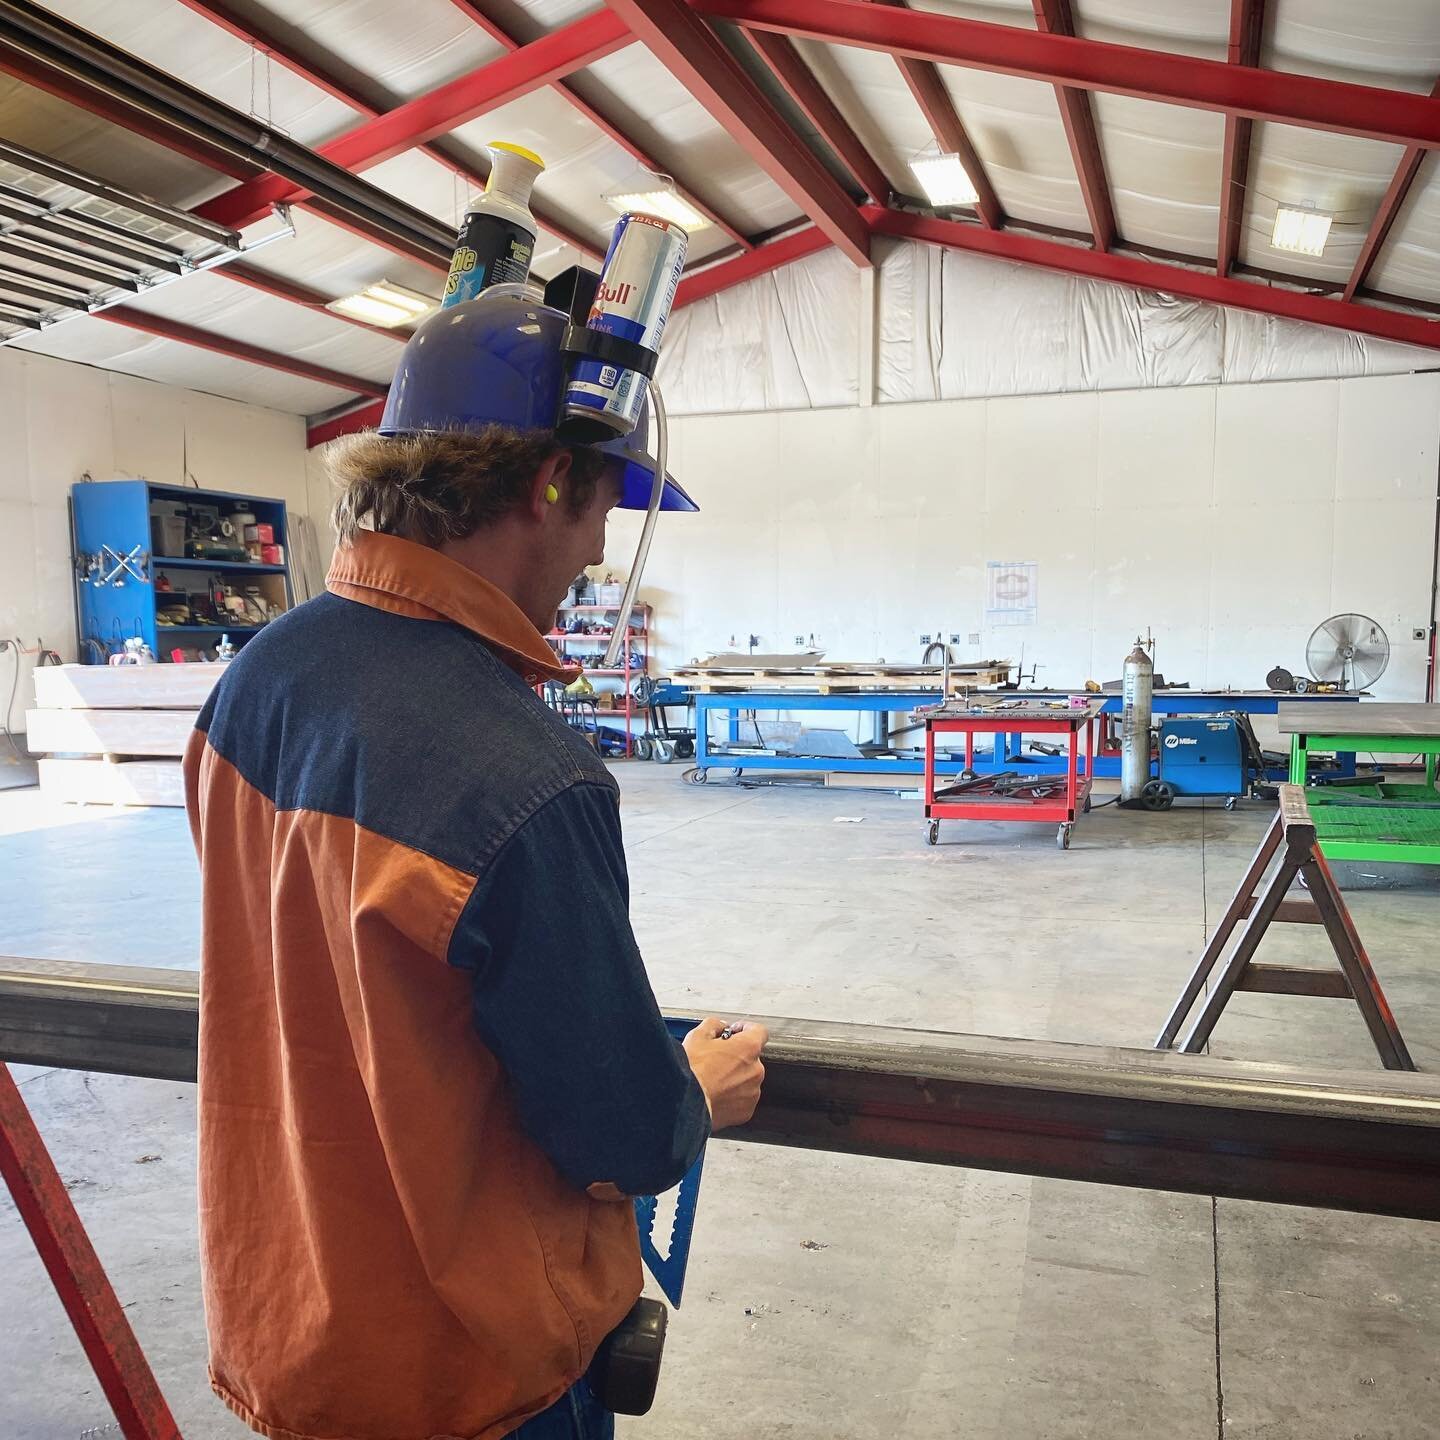 #redbull is a tool of the trade. #thinkingcap 

#fabrication #structuralsteel